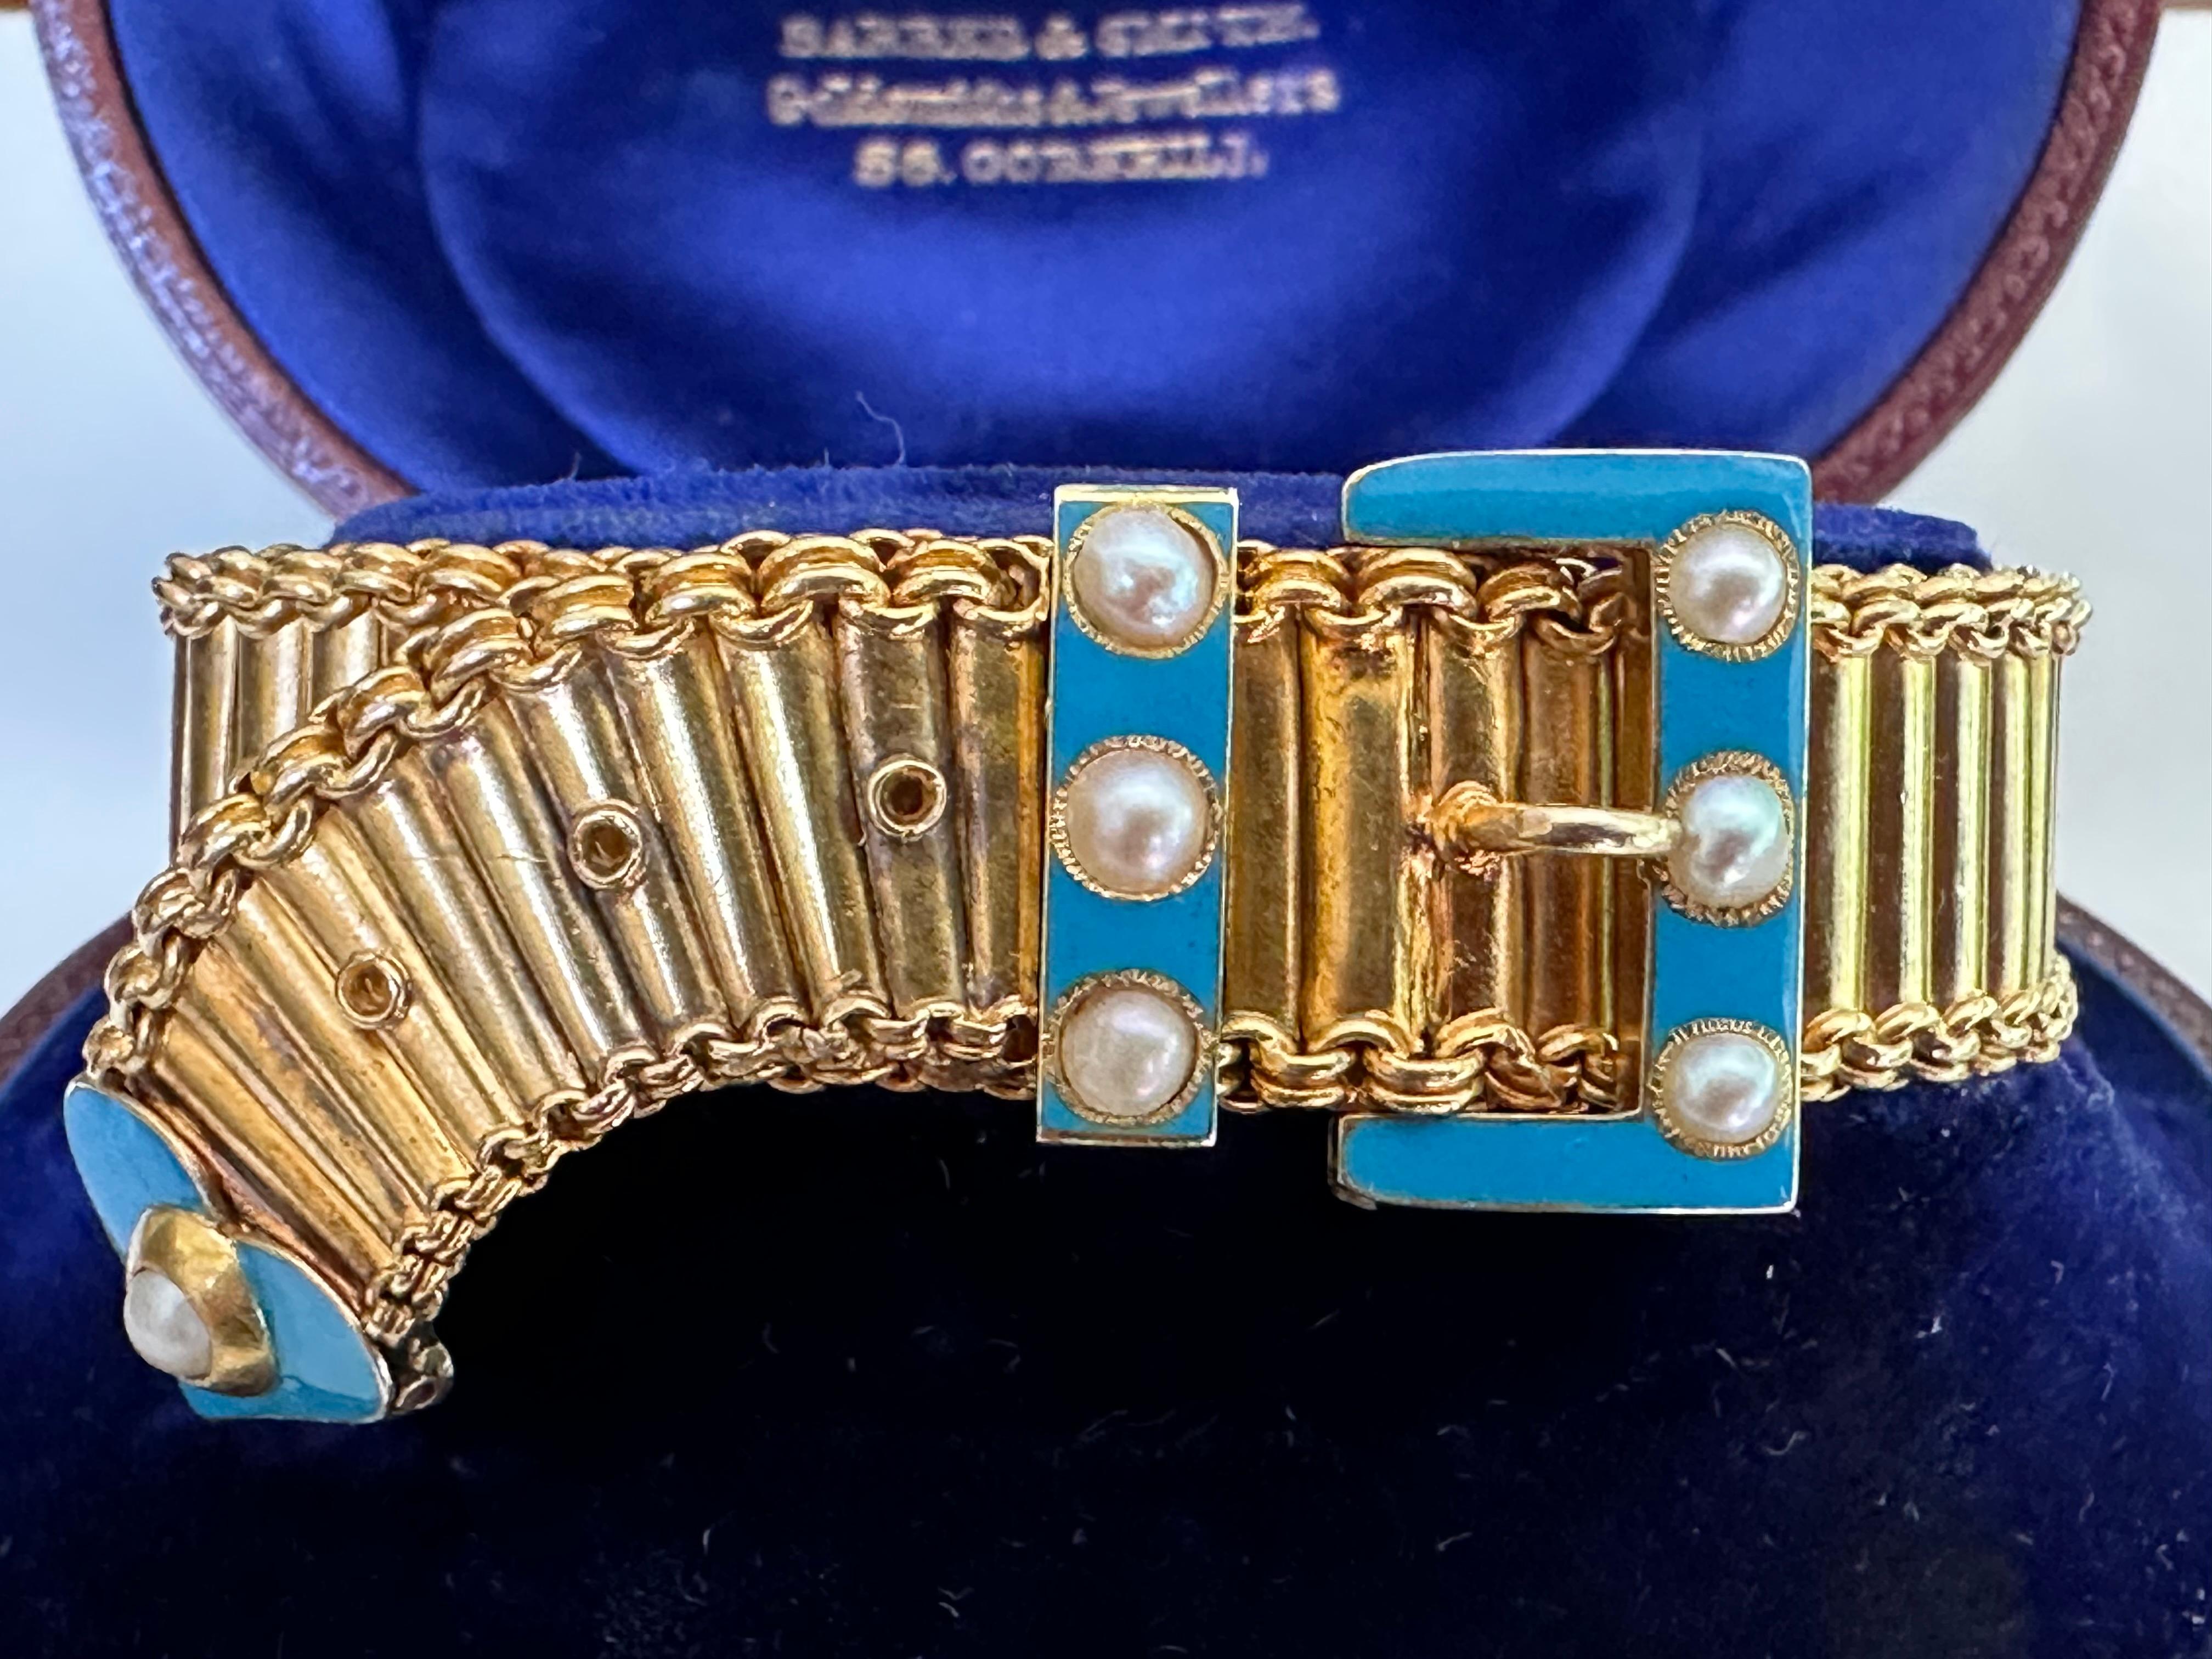 This luxurious antique Victorian 15K yellow gold mesh belt and buckle bracelet is adorned with seven white pearls and light blue enamel. The bracelet comes with its original antique brown leather jewelry box from legendary British goldsmiths and